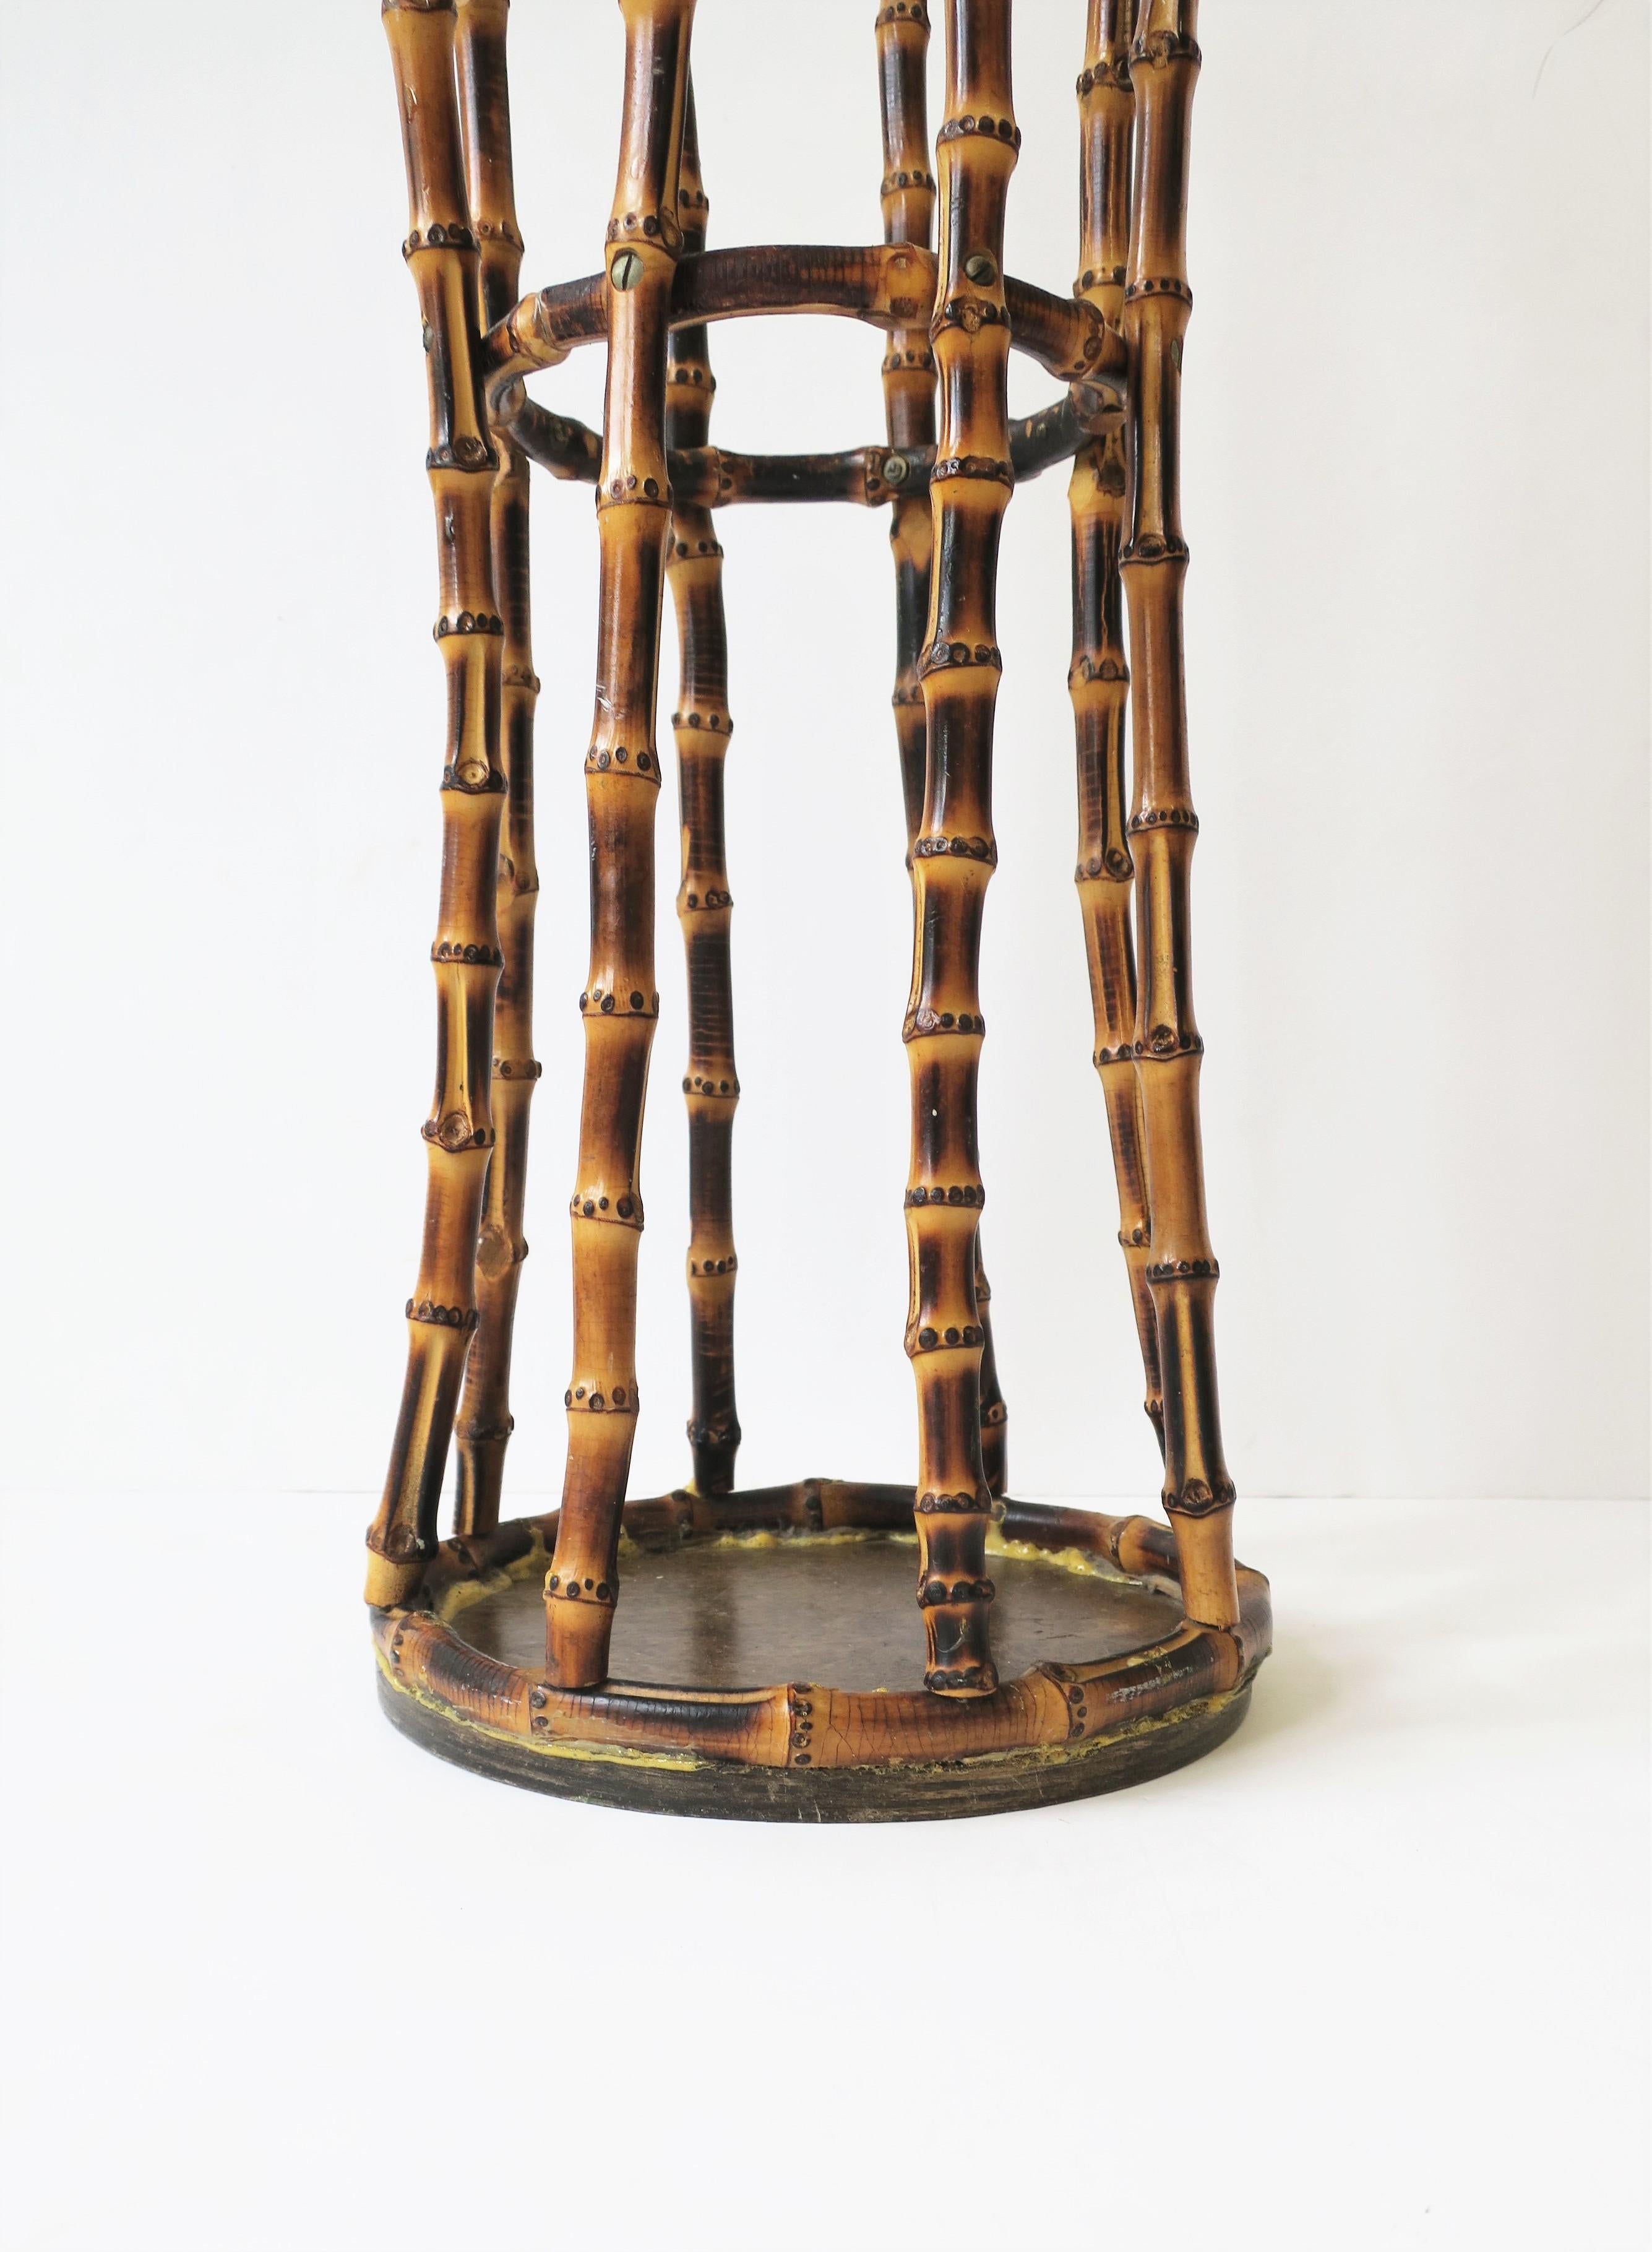 Bamboo Umbrella Holder Stand in the style of Gucci 4